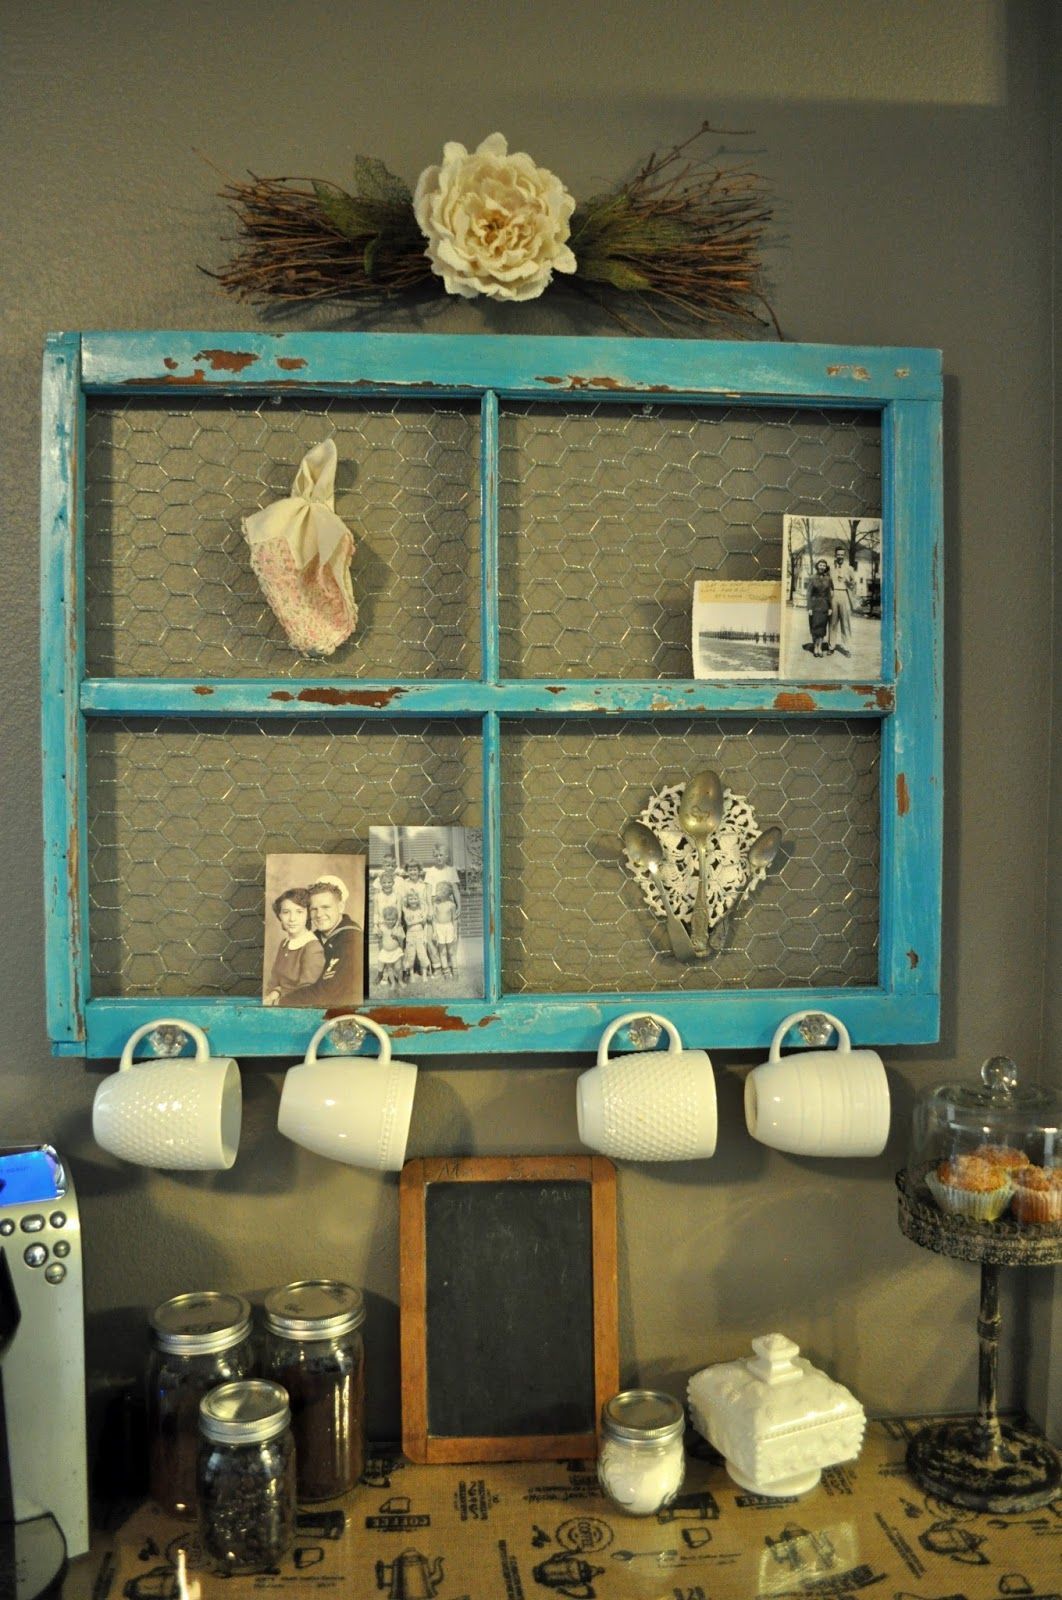 20 Different Ways To Use Old Window Frames | The Best Throughout Old Rustic Barn Window Frame (View 20 of 30)